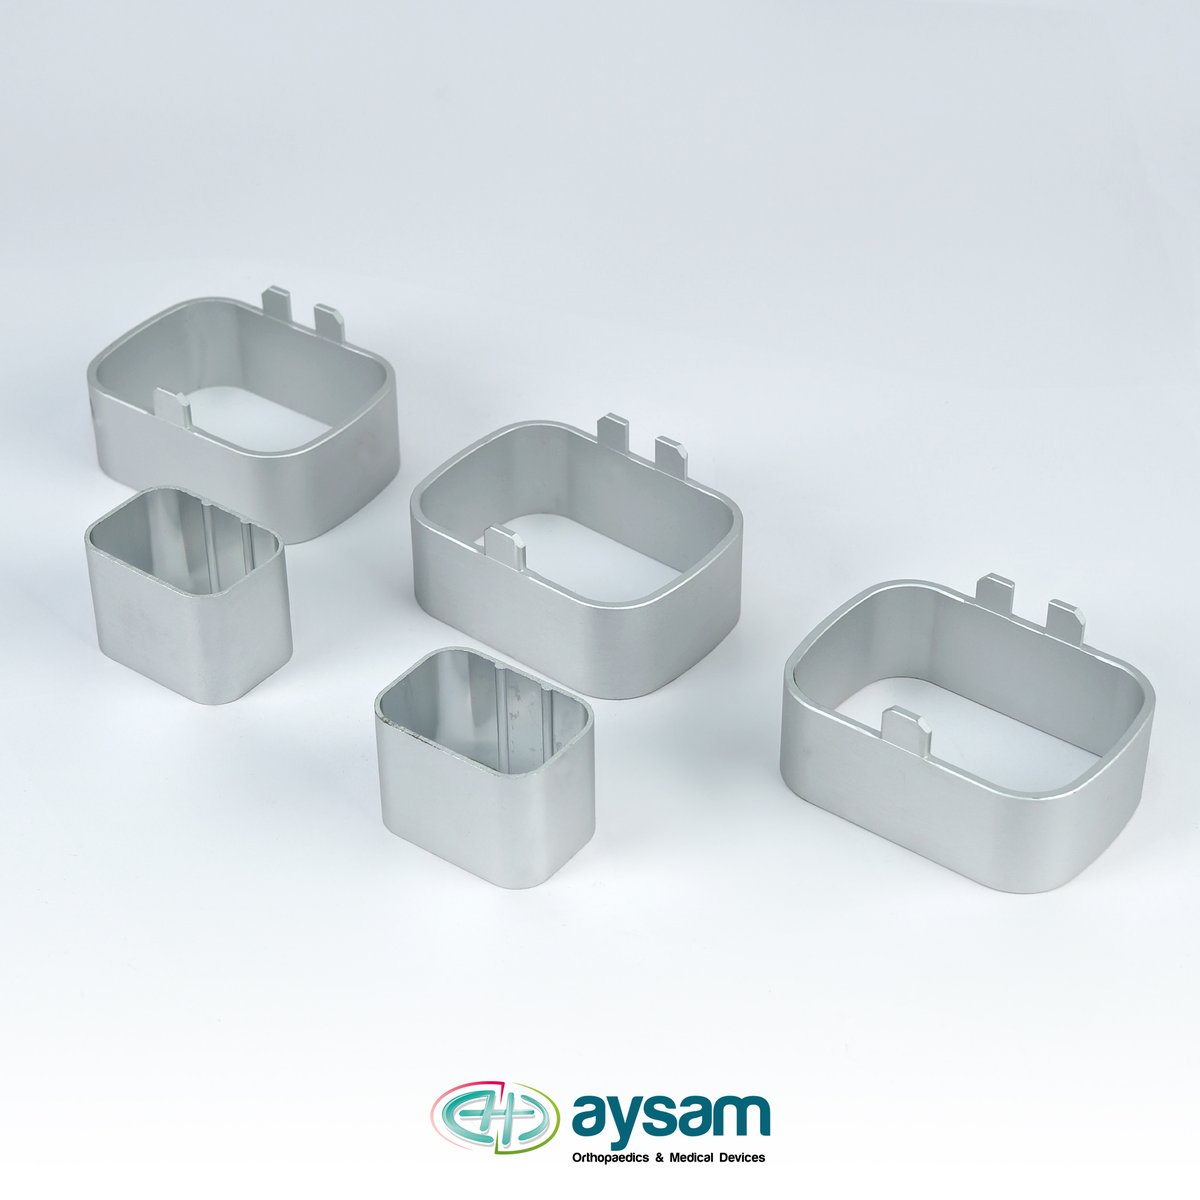 Aysam Power Saw & Orthopaedic Cannulated Power Drill Systems.

For more information;
aysam.com.tr

#Aysam #AysamOrthopaedics #medical #medicaldevices #medicalproducts #arthroplasty #traumaproducts #surgicalequipment #sterilizationcontainer